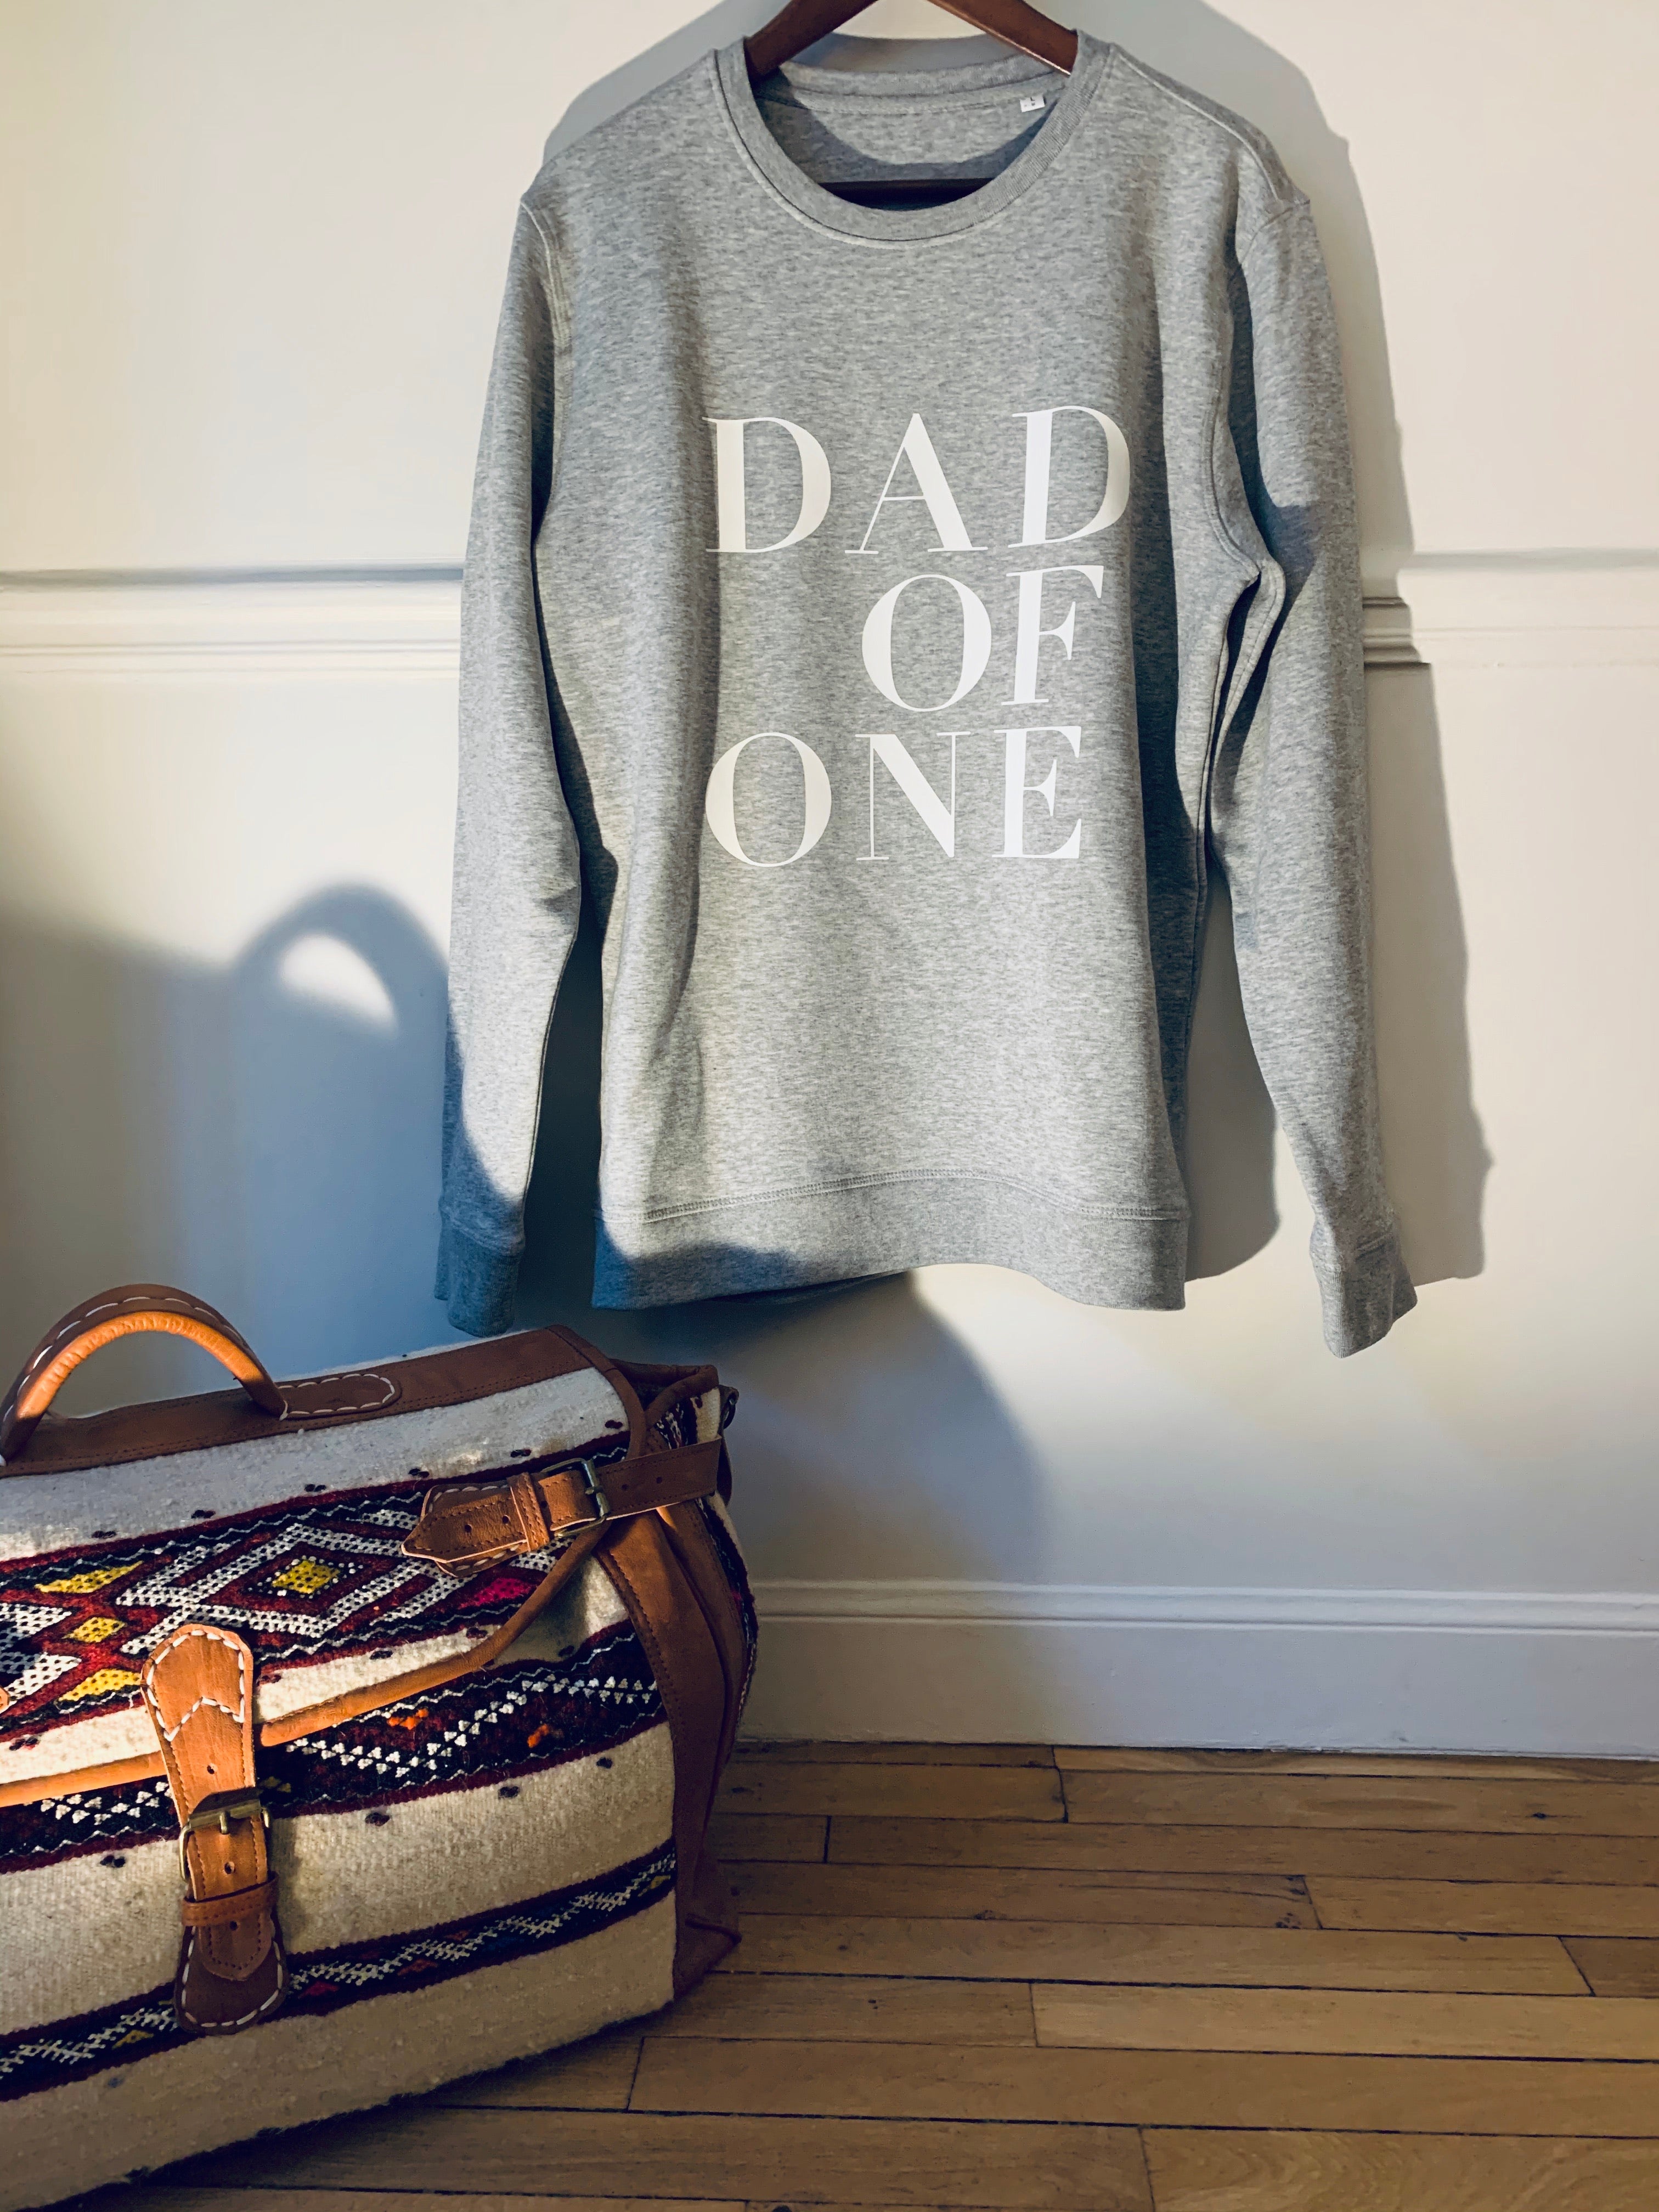 SWEATSHIRT DAD OF ONE, DAD OF TWO, DAD OF THREE... HEATHER GRAY